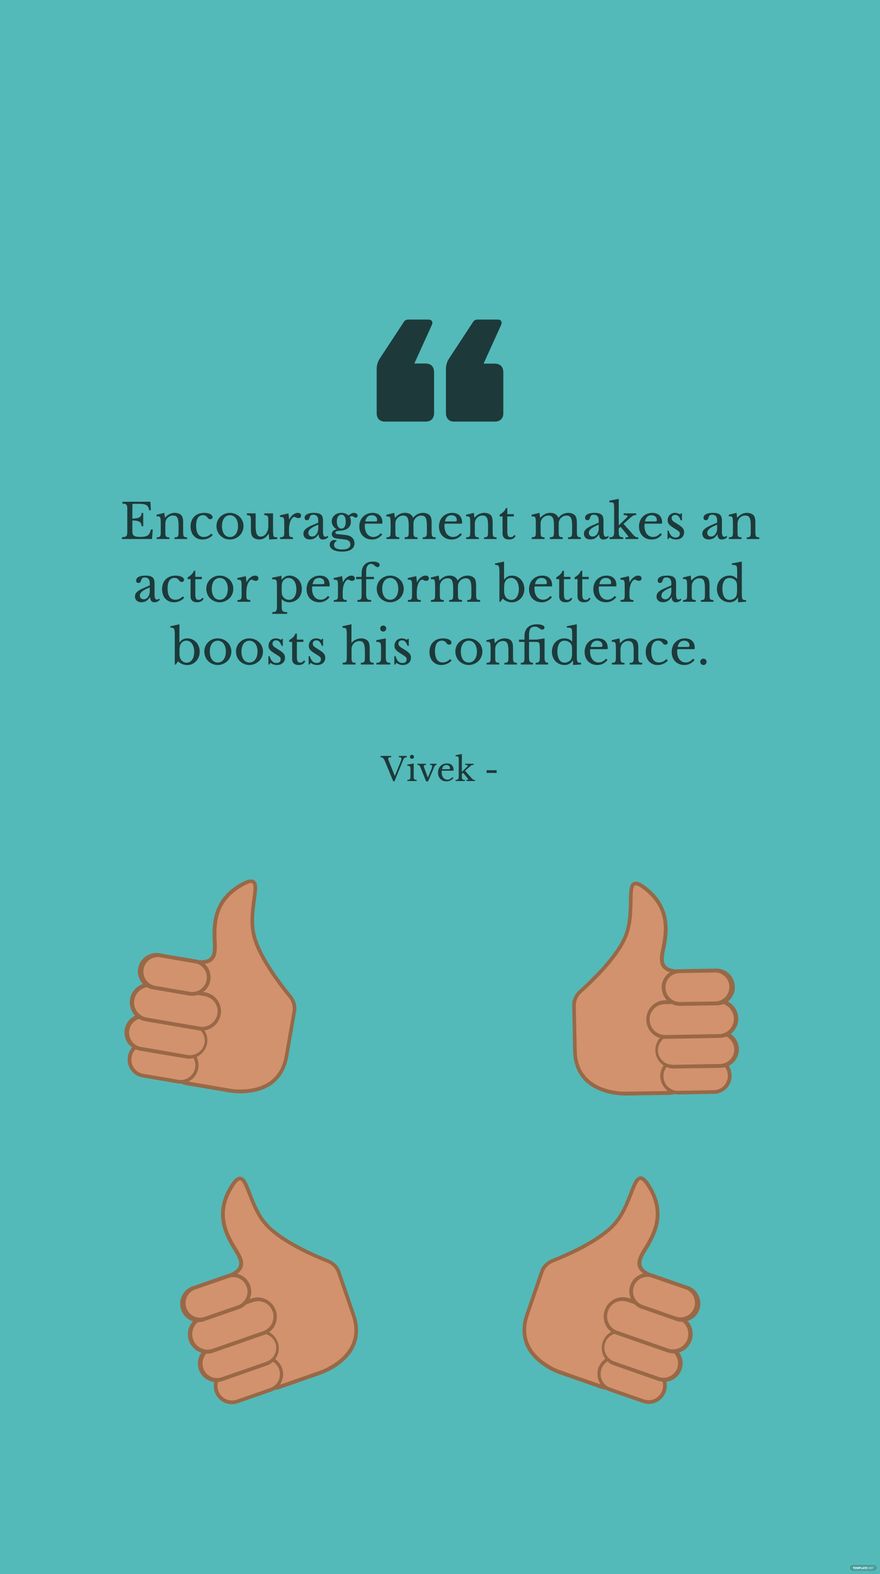 Vivek - Encouragement makes an actor perform better and boosts his confidence.